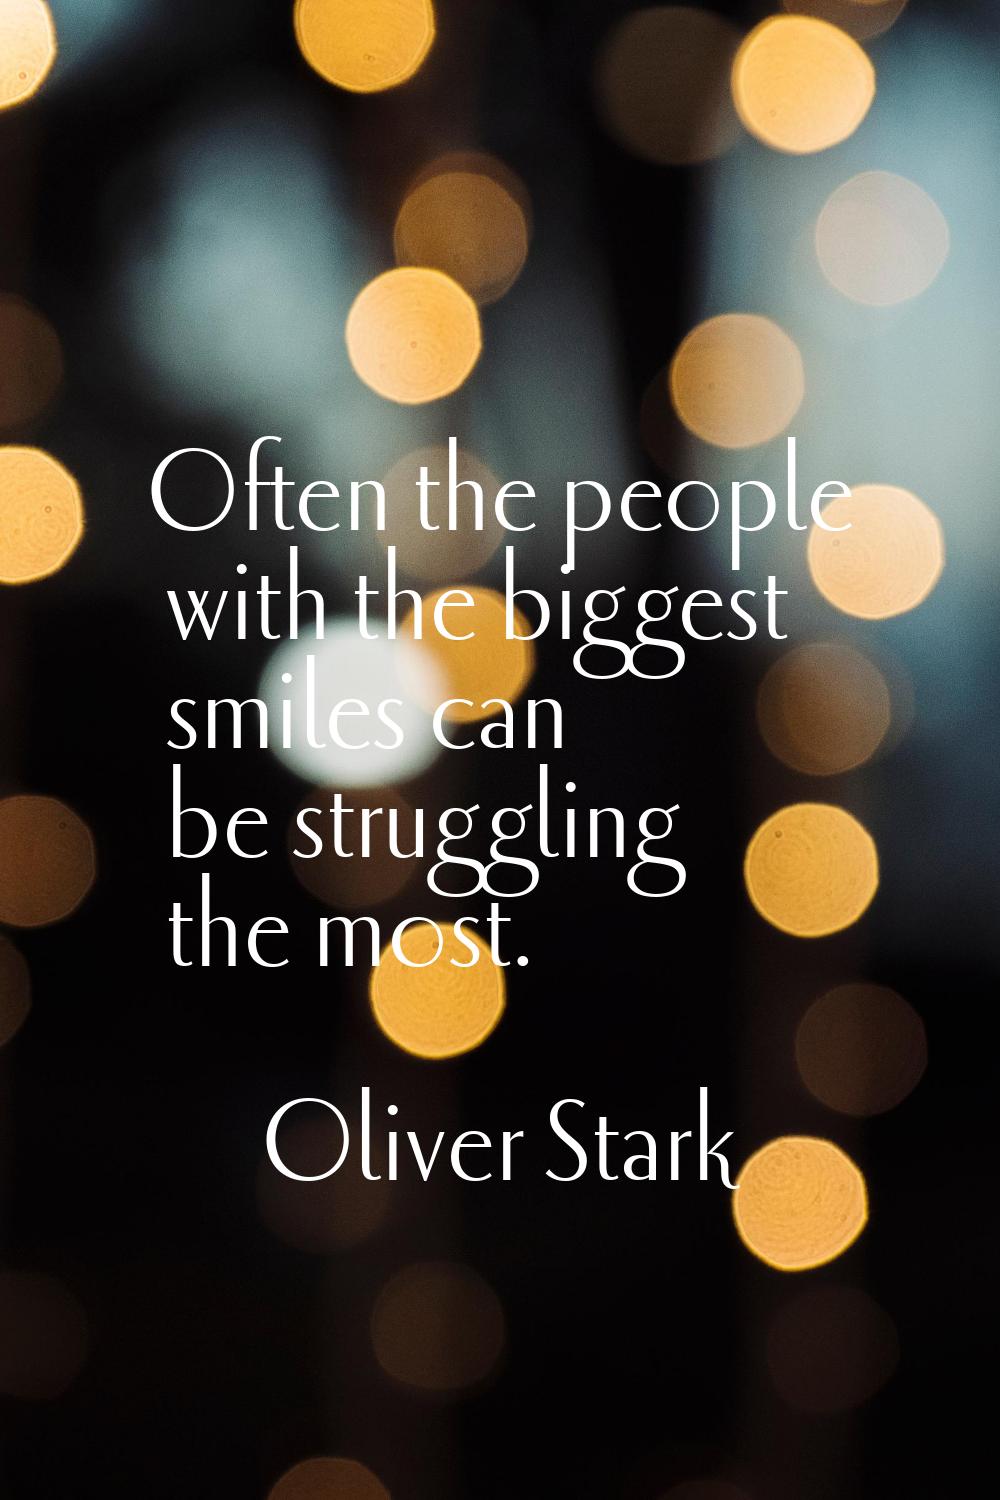 Often the people with the biggest smiles can be struggling the most.